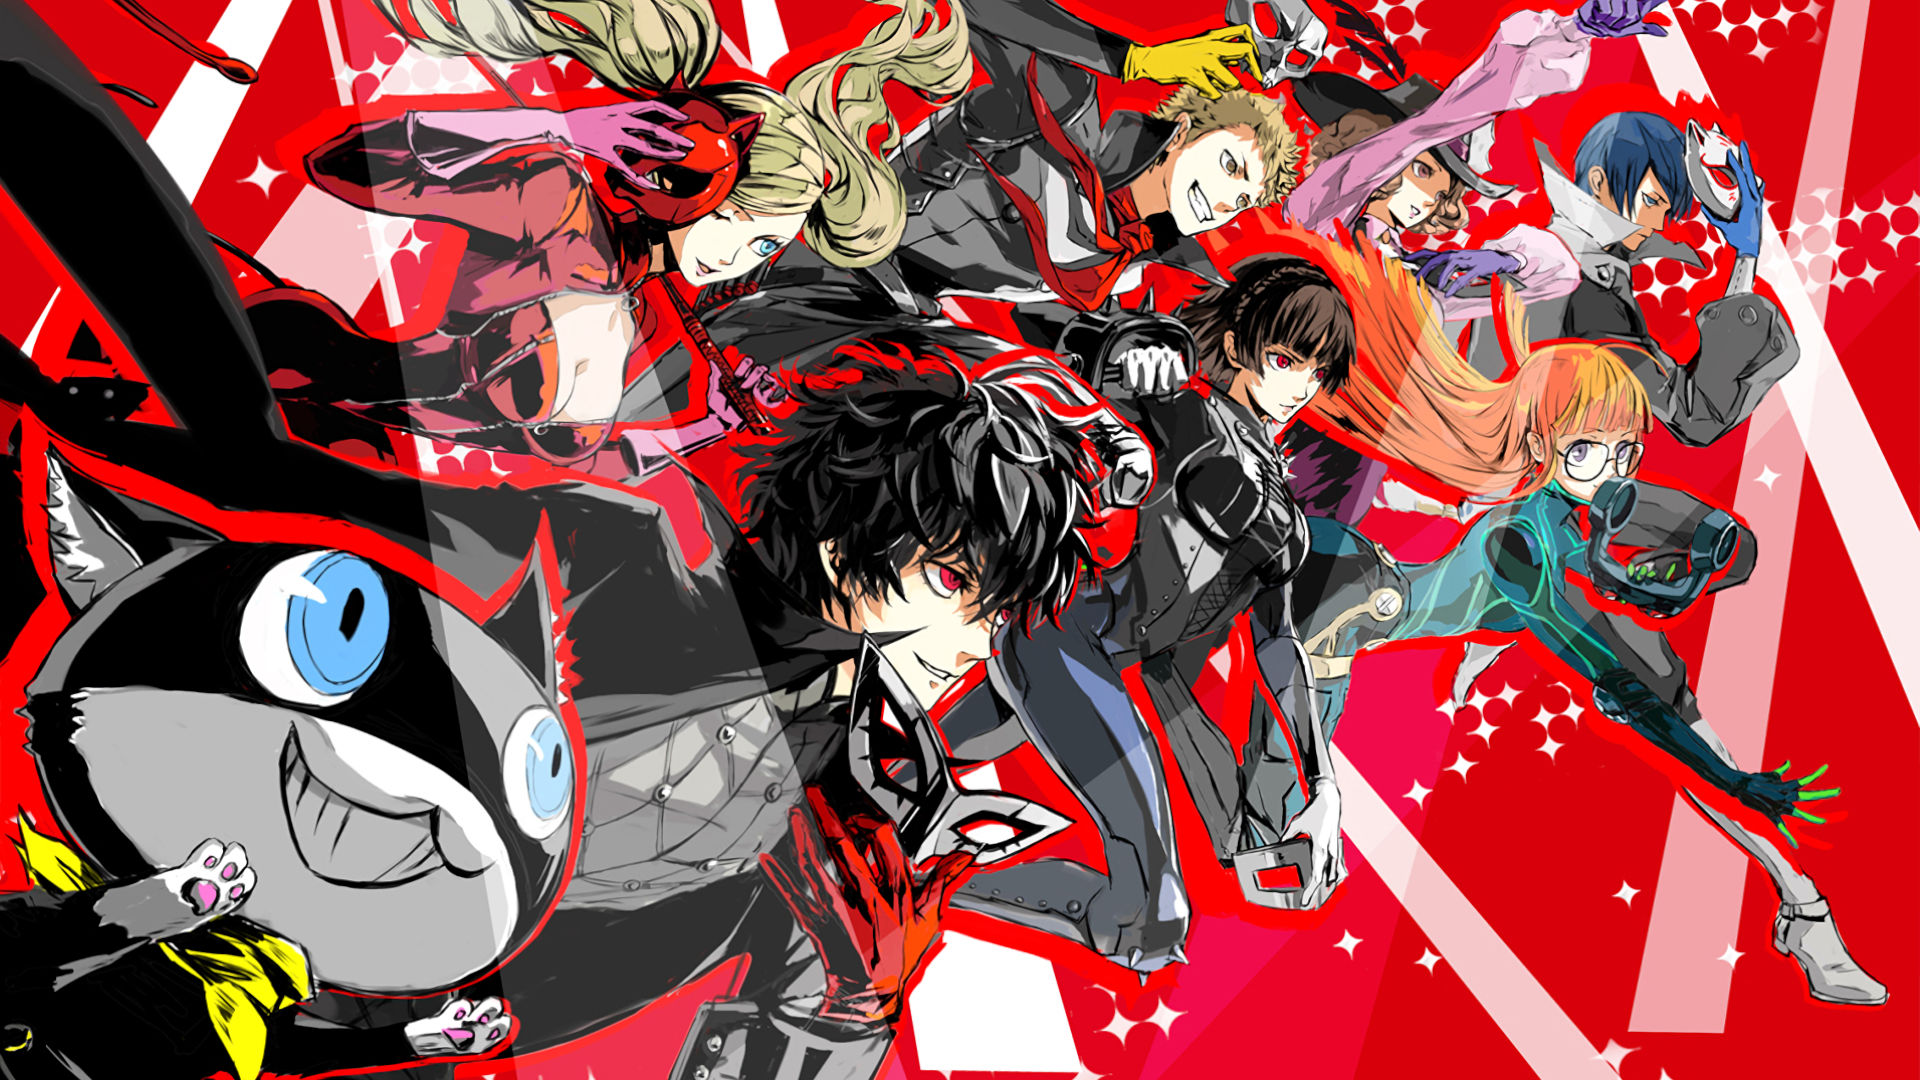 Persona 5 wallpapers – backgrounds for your desktop or mobile